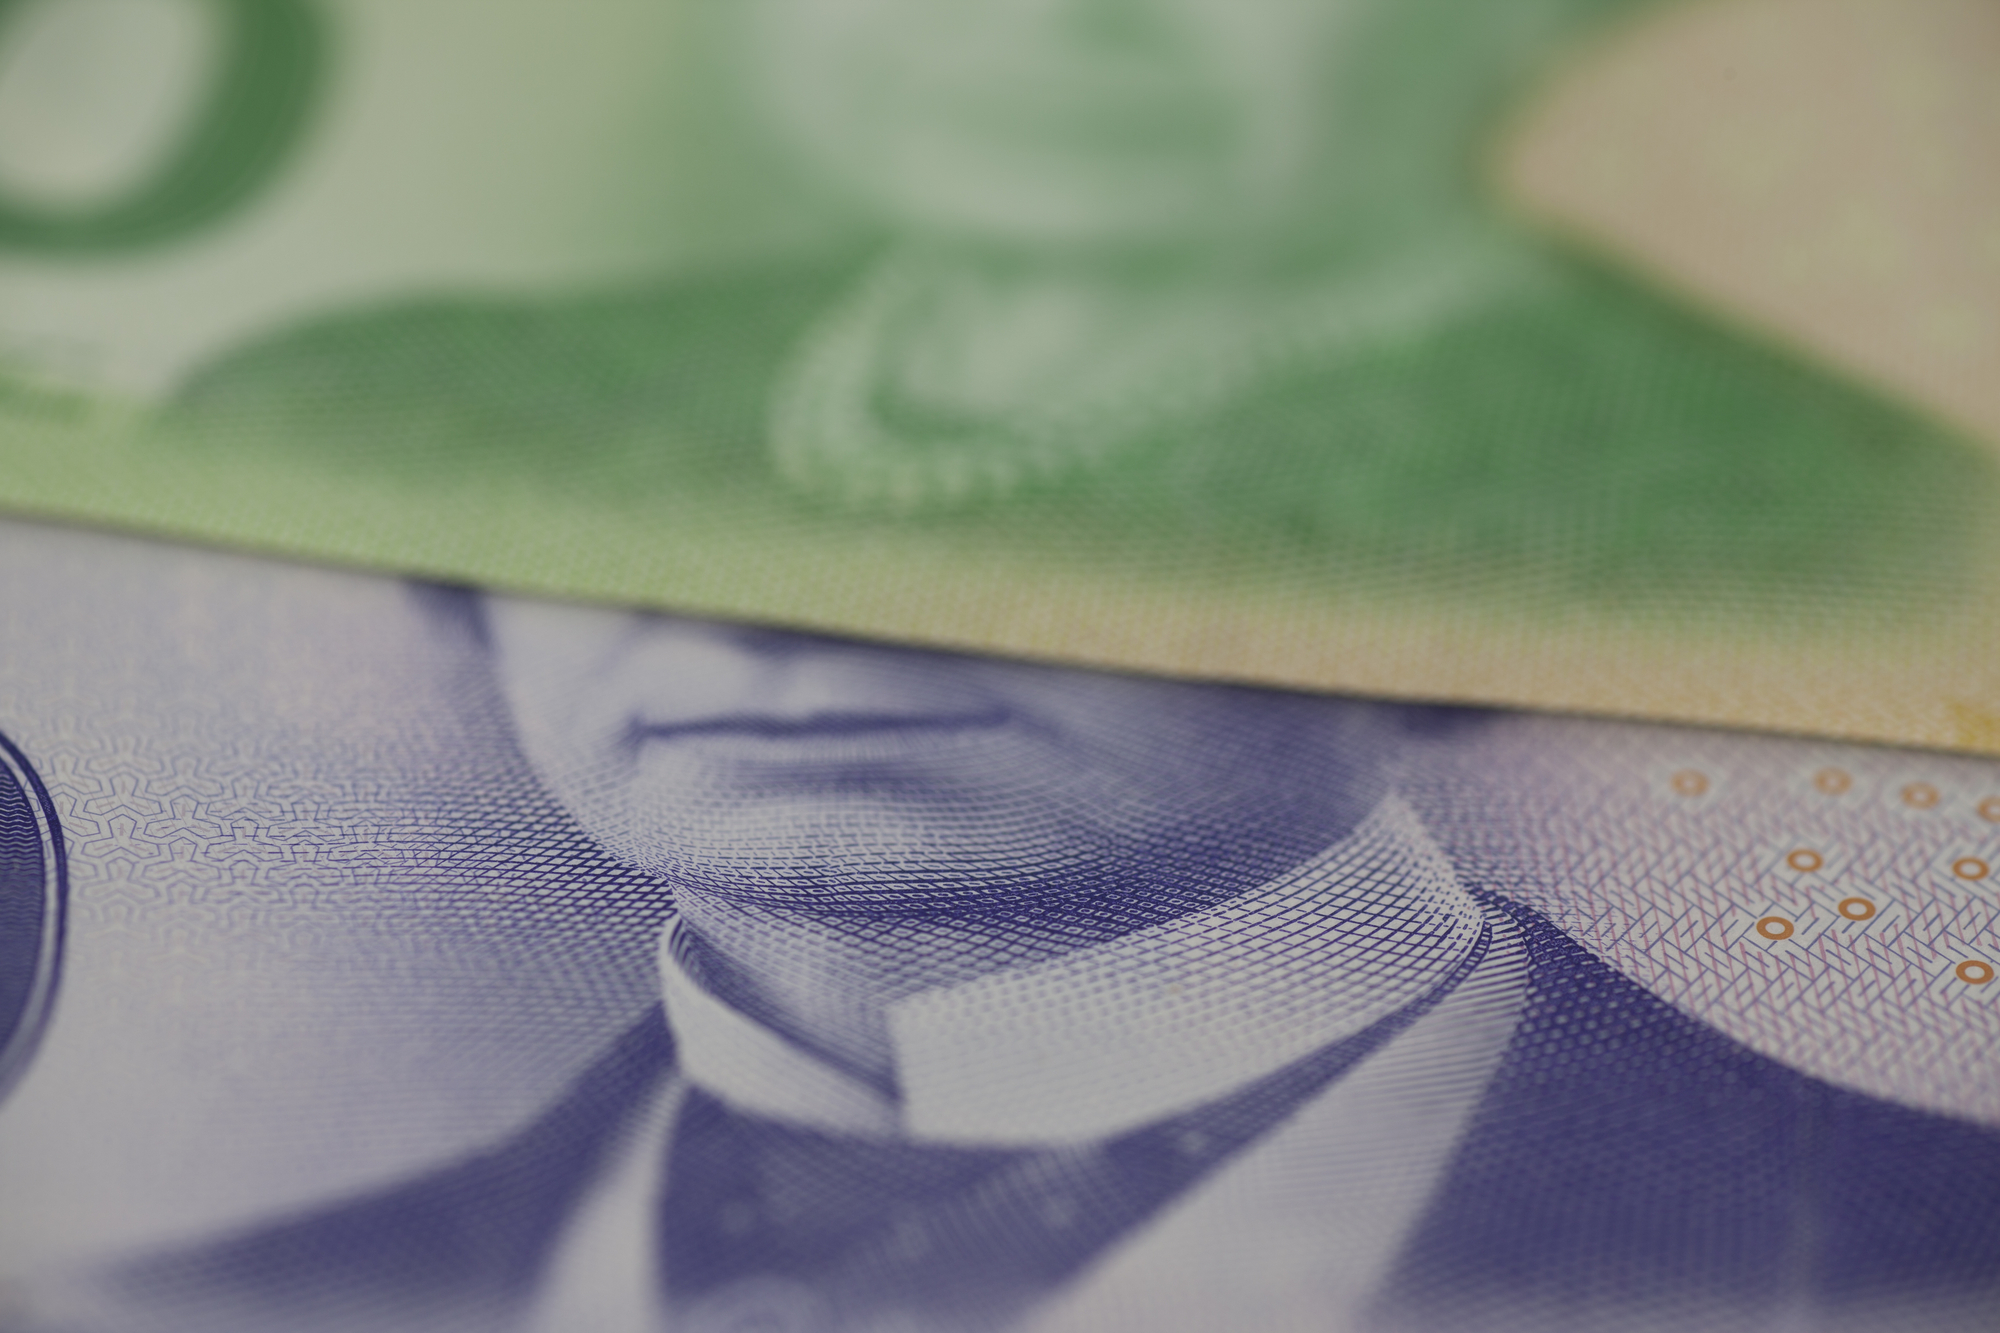 close-up photograph of Canadian bank notes covering politician's face